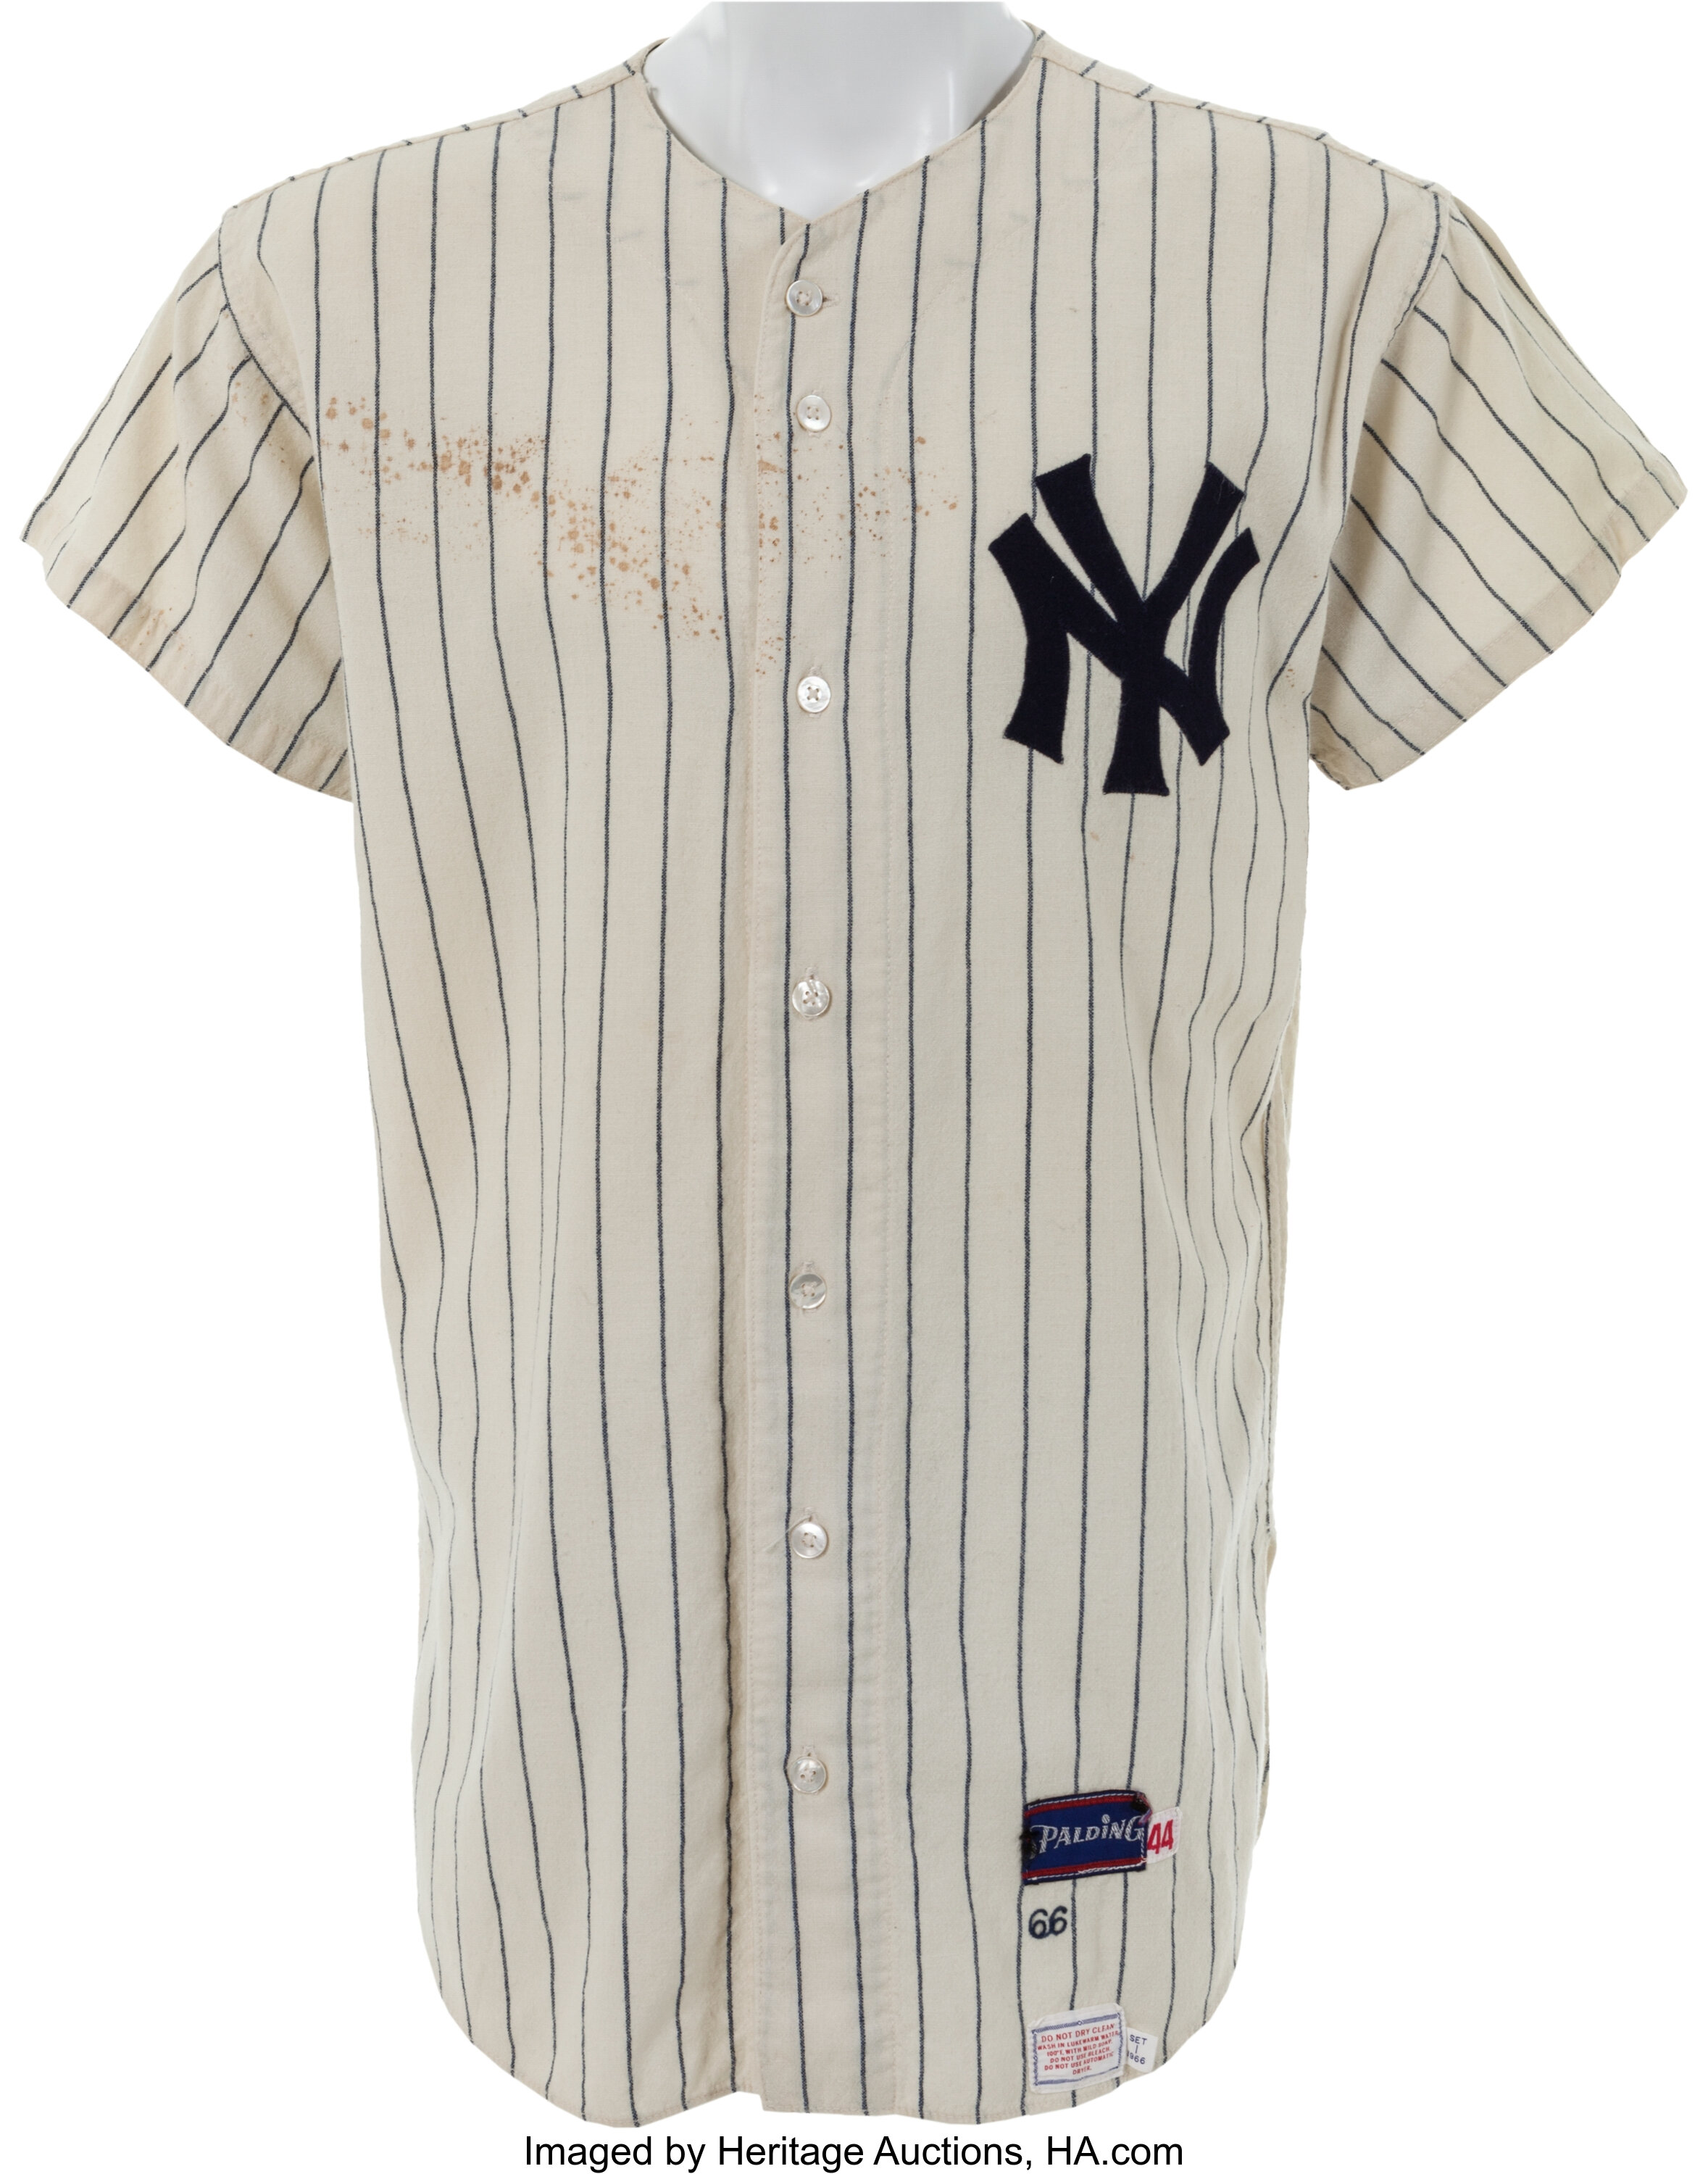 Fun Facts About New York Yankees Jerseys